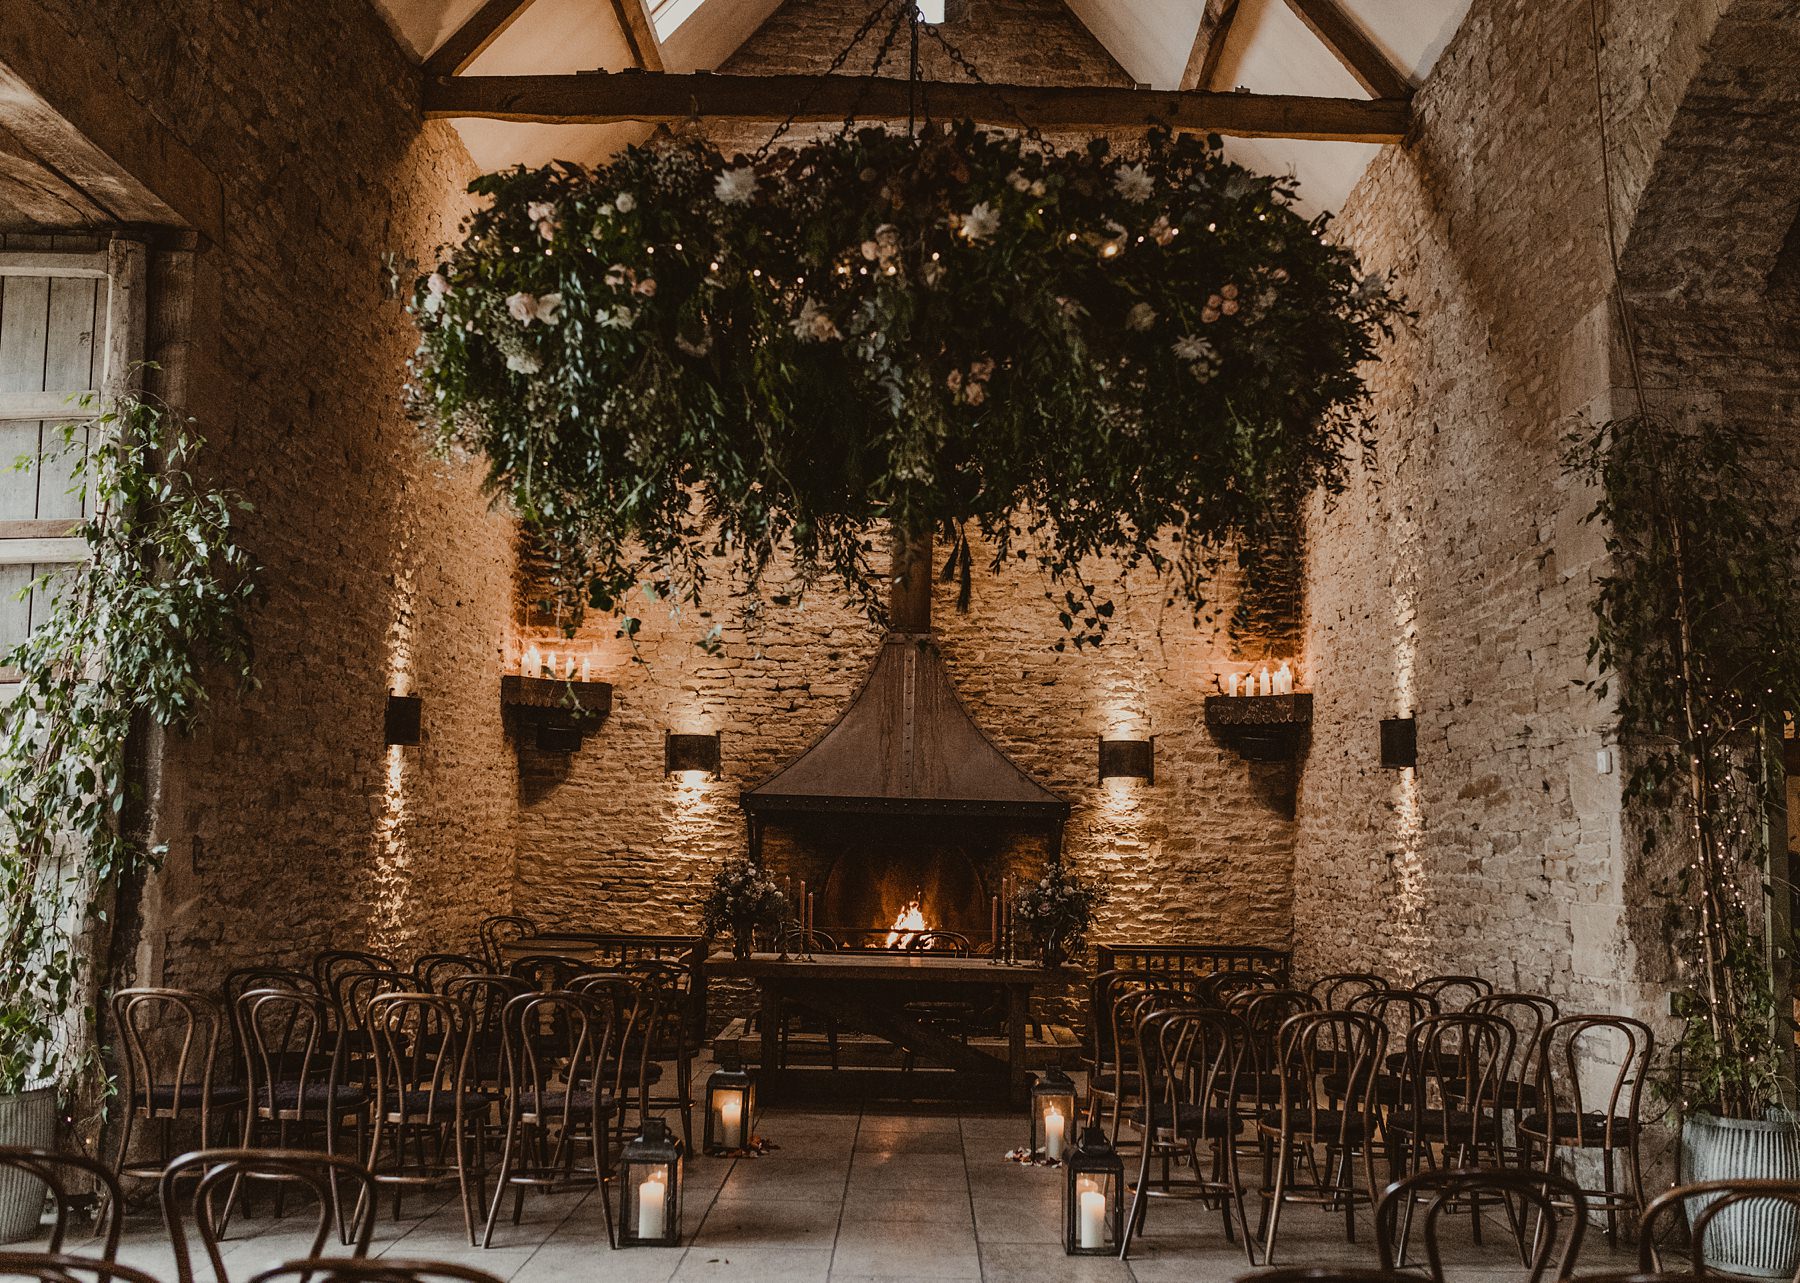 Foliage installation decorating ceremony room with fireplace at Stone Barn 